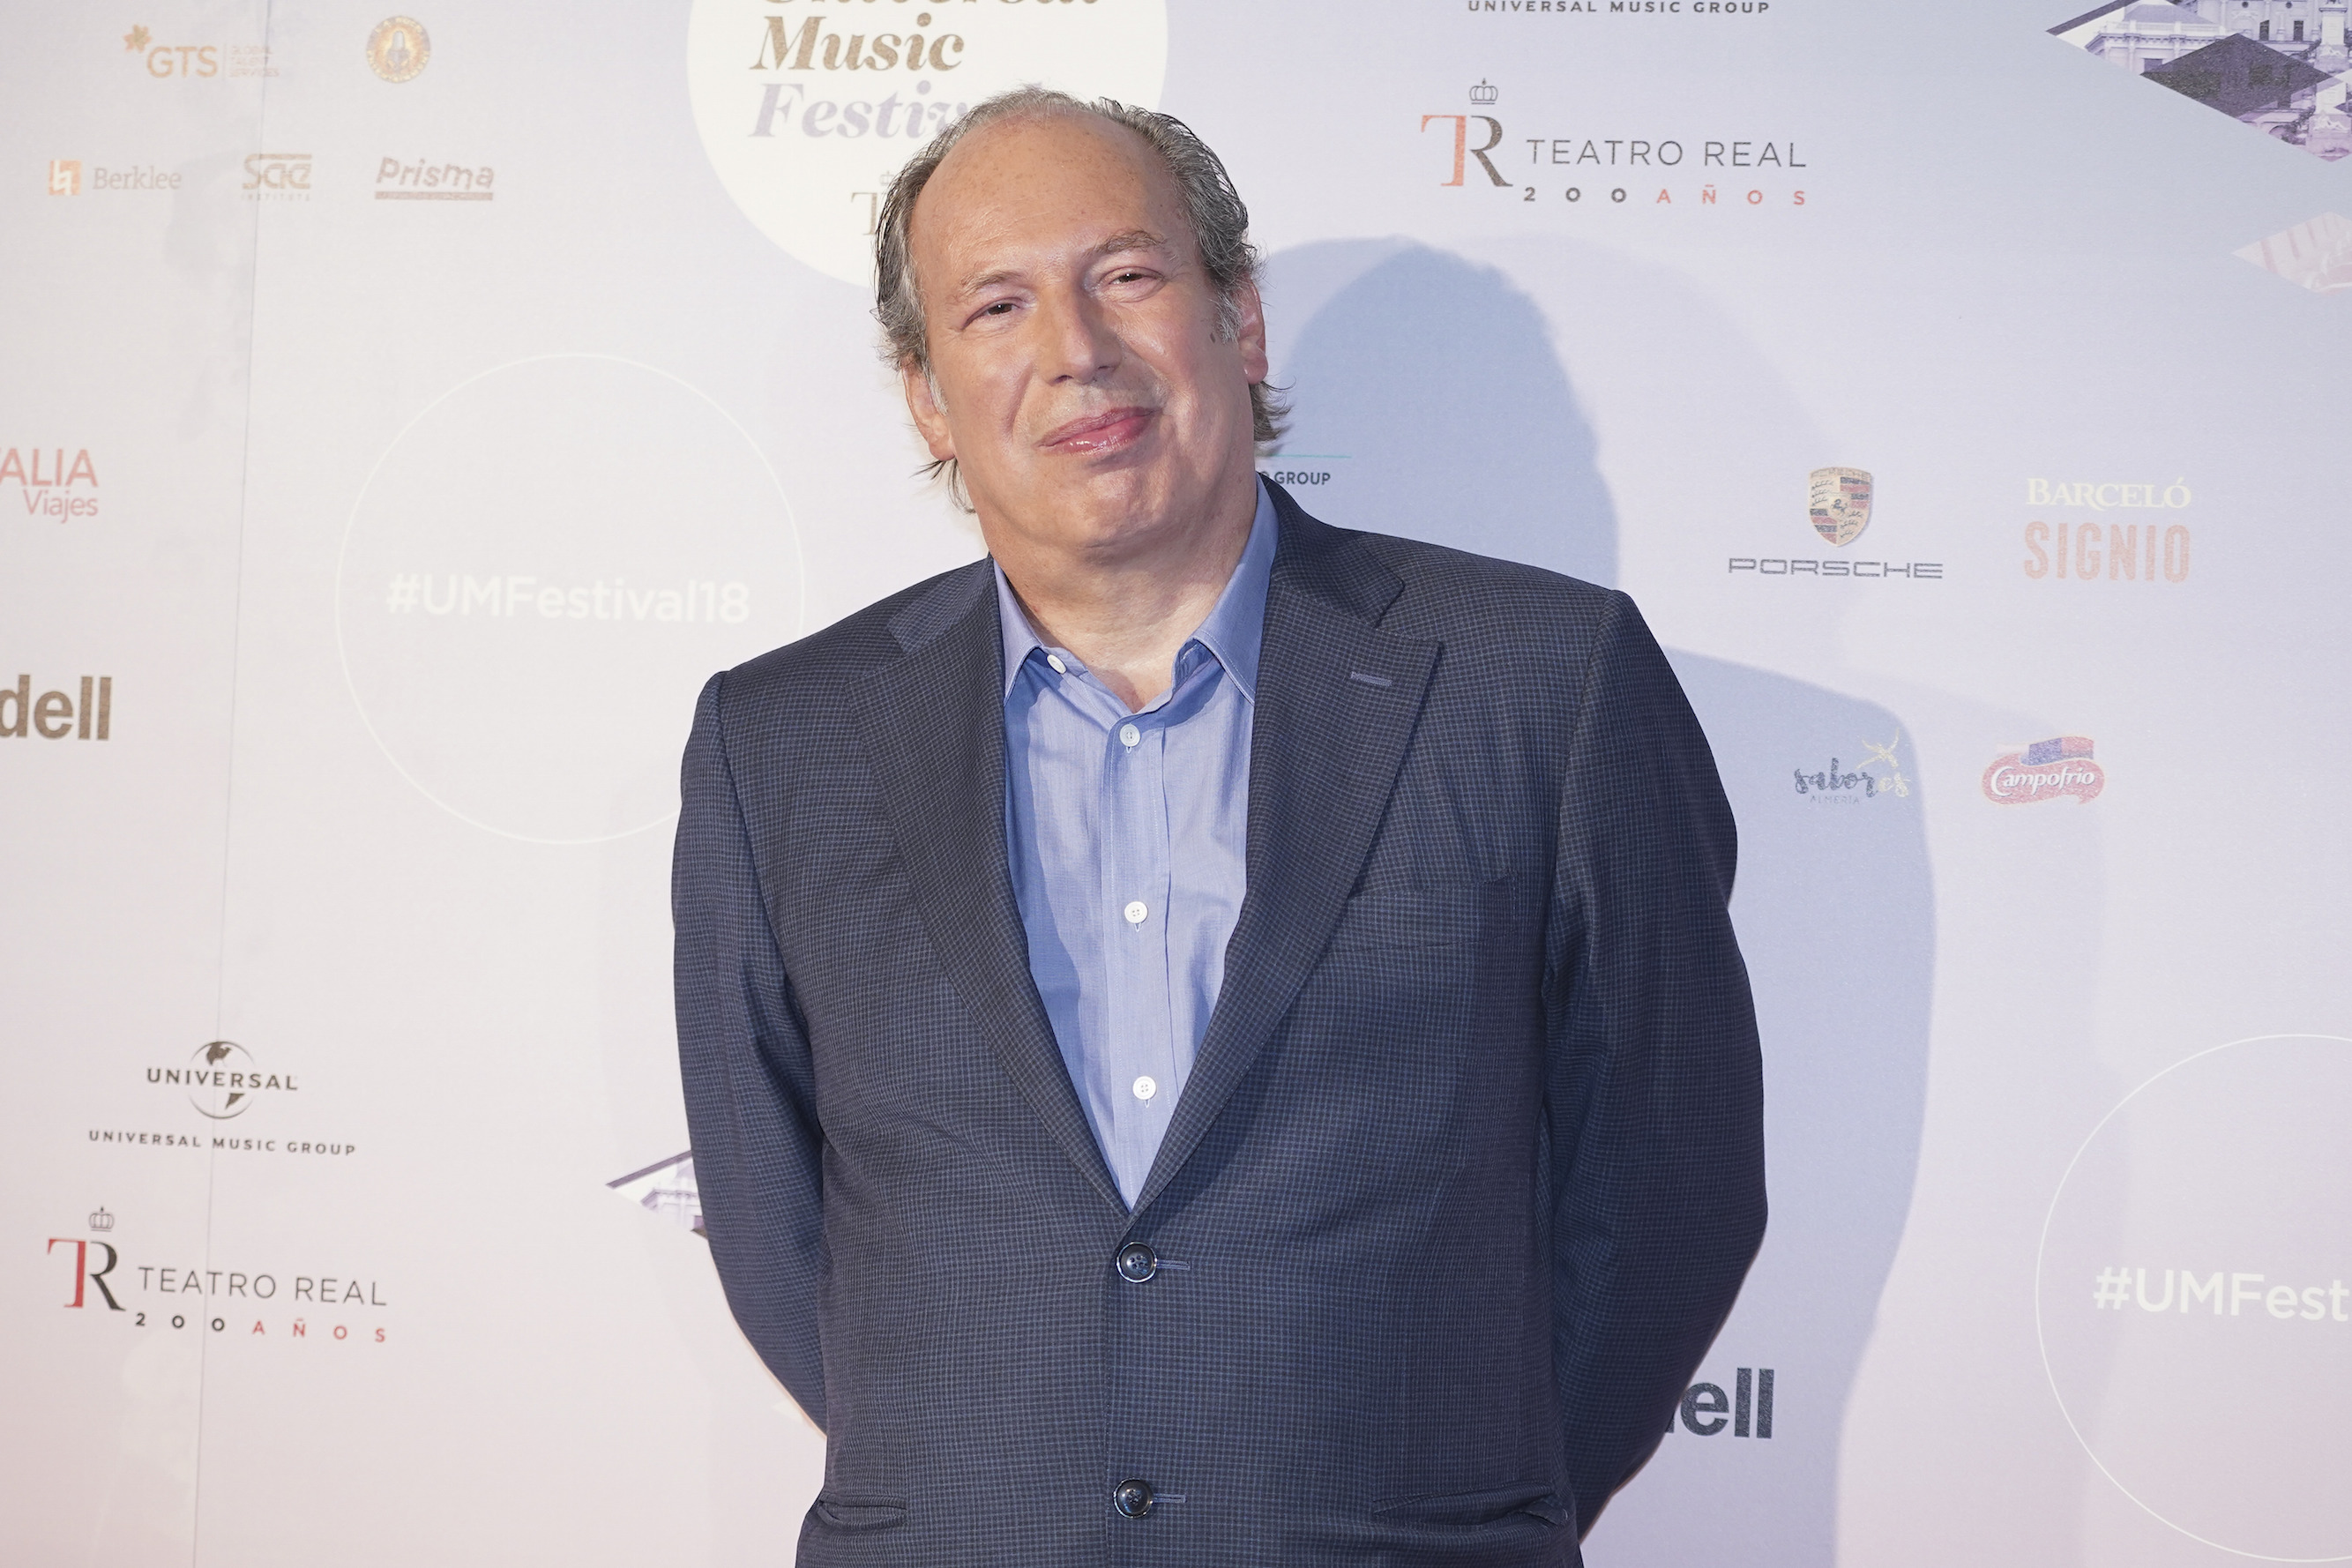 Composer Hans Zimmer attends a press conference at Royal Theatre on July 3, 2018 in Madrid, Spain. (Photo by Oscar Gonzalez/NurPhoto via Getty Images)